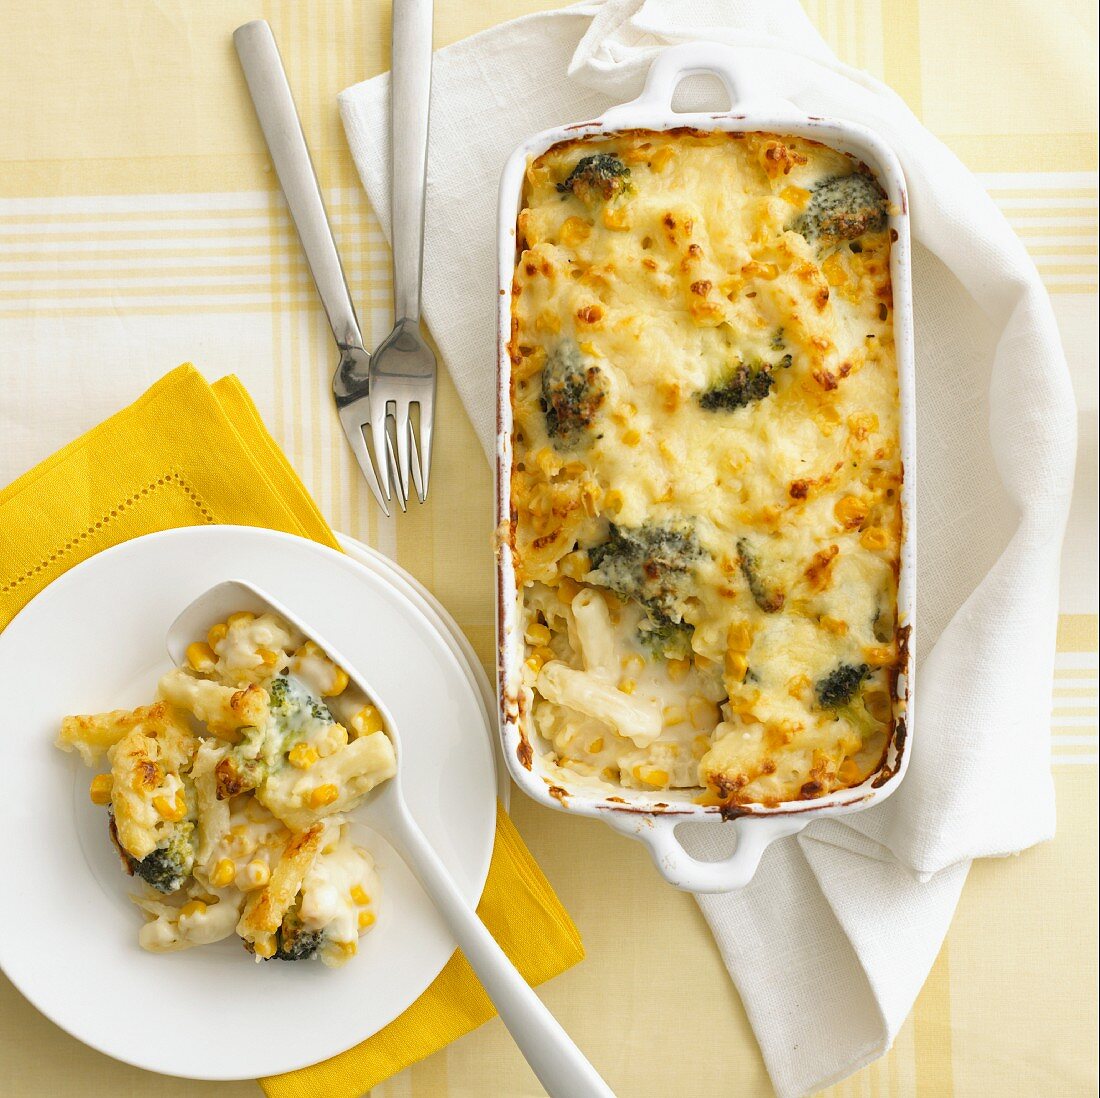 Pasta bake with sweetcorn, broccoli and cheese